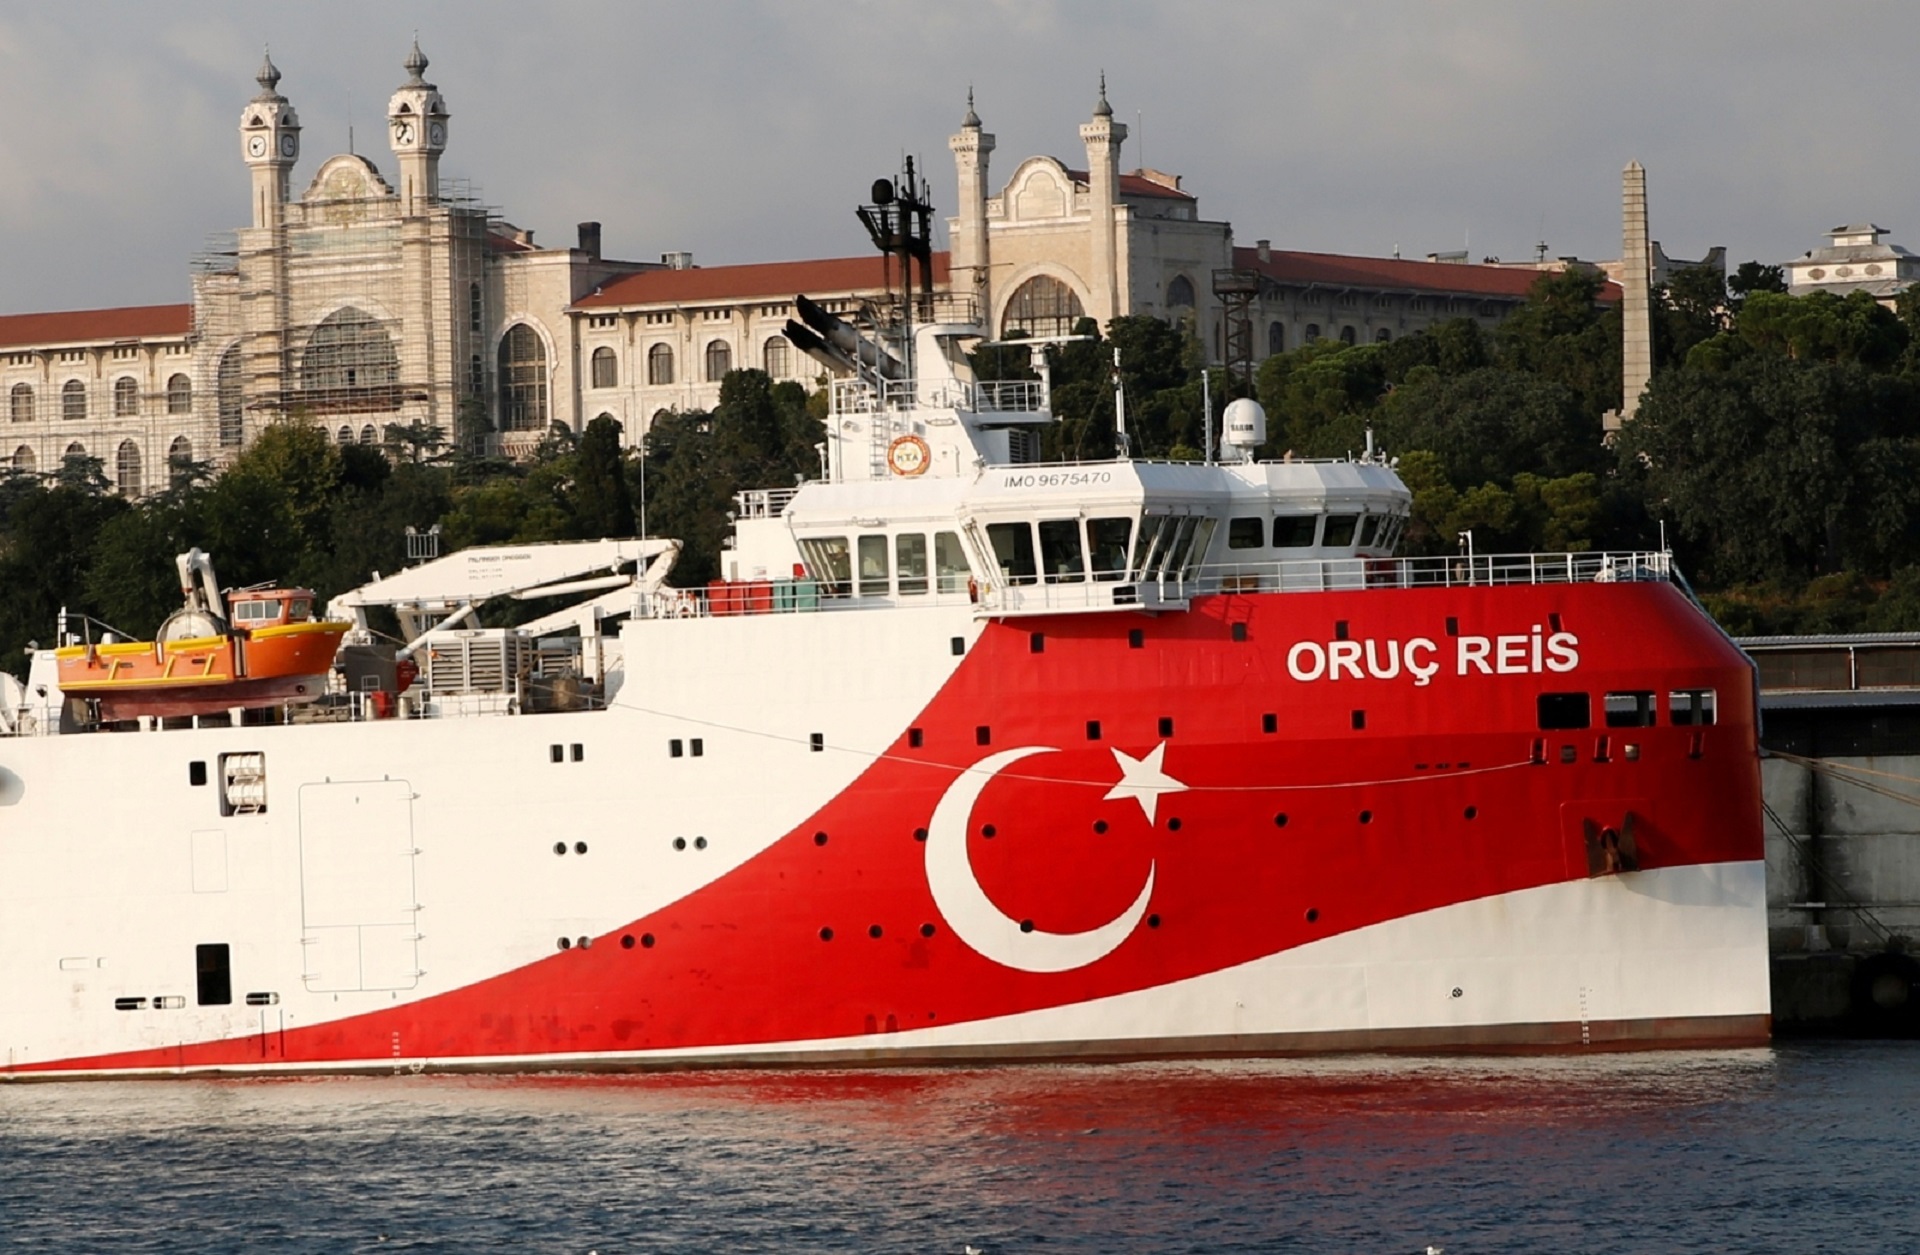 FILE PHOTO: Turkish seismic research vessel Oruc Reis is seen in Istanbul FILE PHOTO: The Turkish seismic research vessel Oruc Reis is seen in Istanbul, Turkey, August 22, 2019. Picture taken August 22, 2019. REUTERS/Murad Sezer/File Photo Murad Sezer